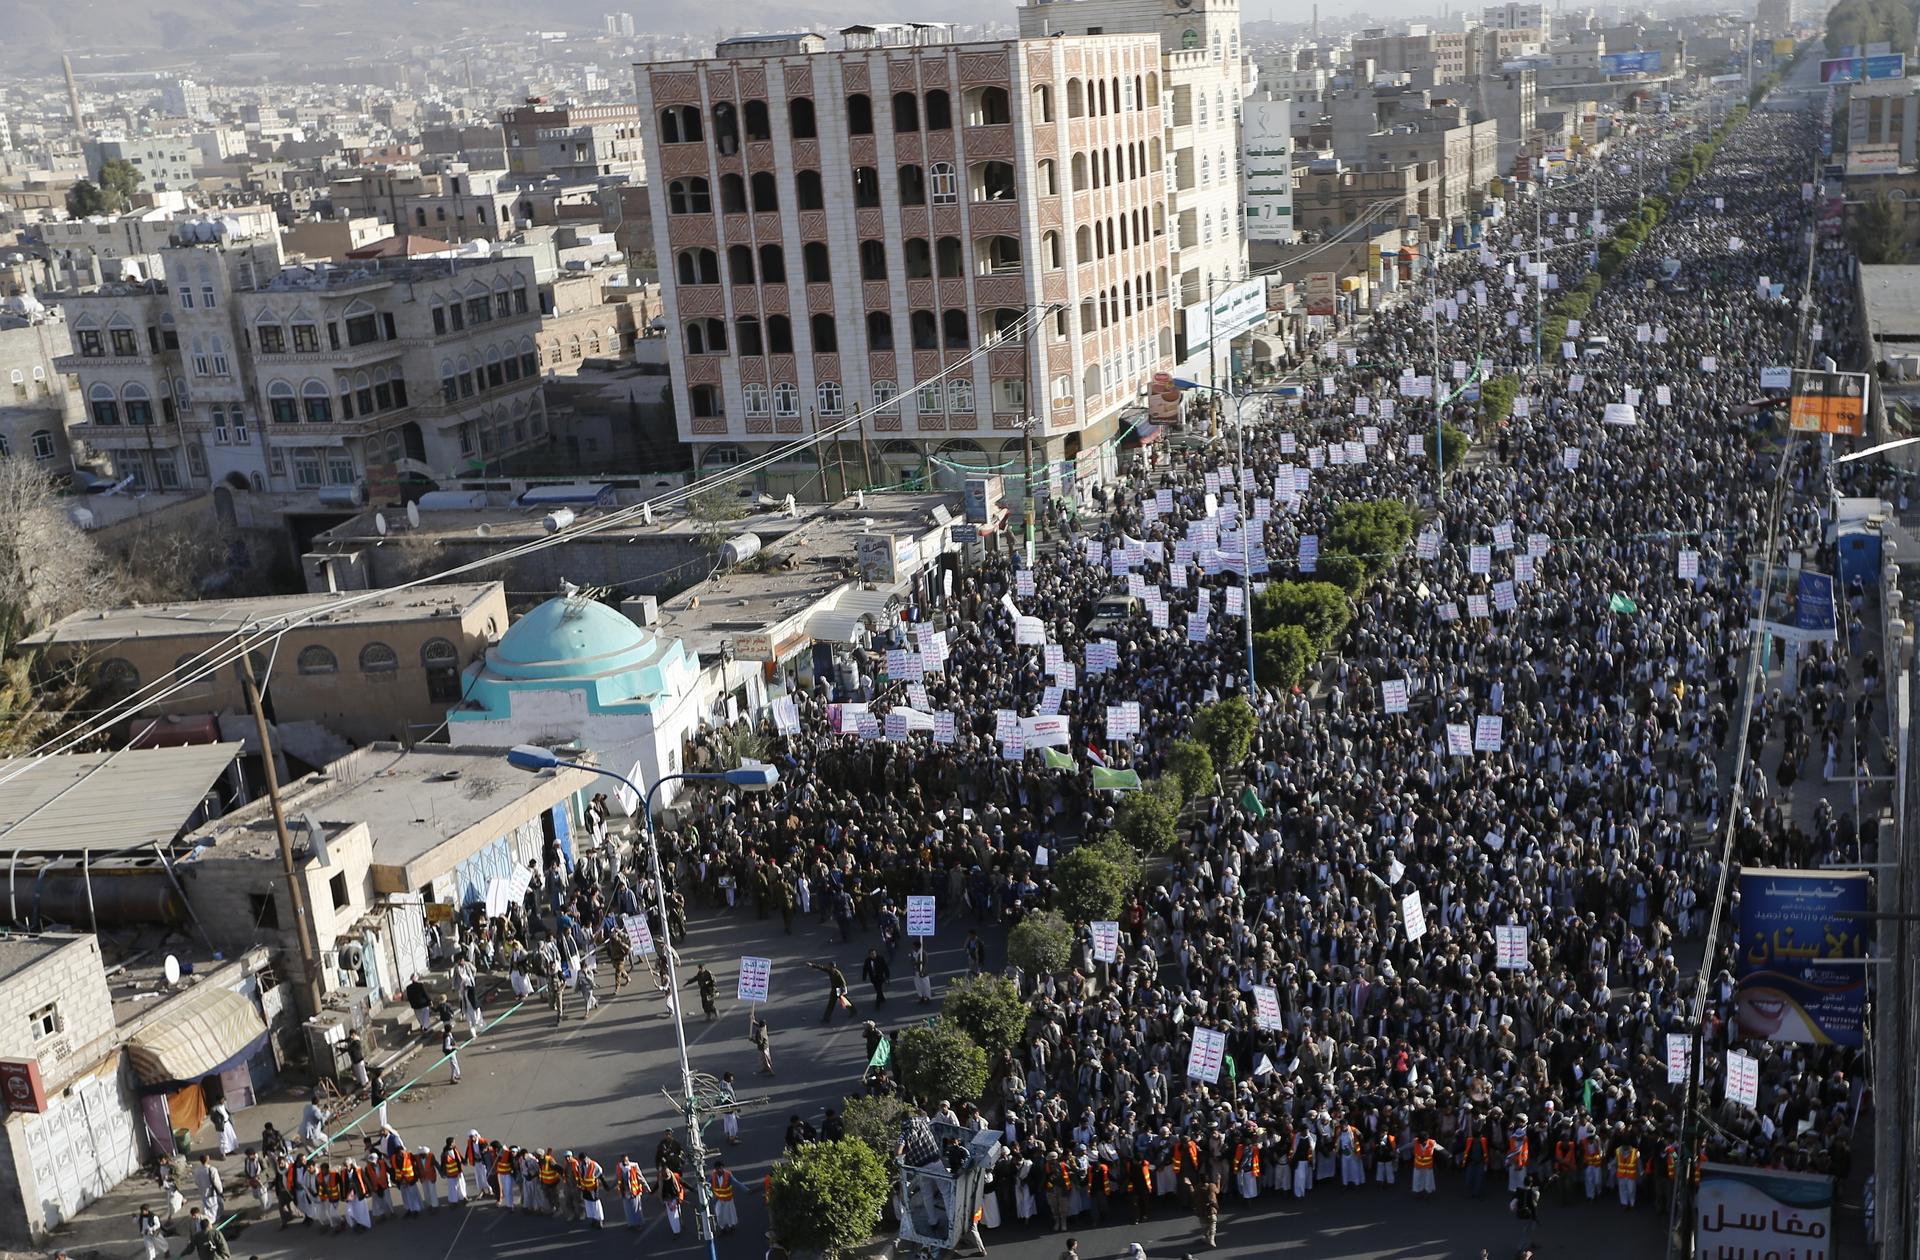 Followers of the Houthi movement march as they demonstrate to show support for the Shiite rebel group in Sana'a on January 23, 2015. 